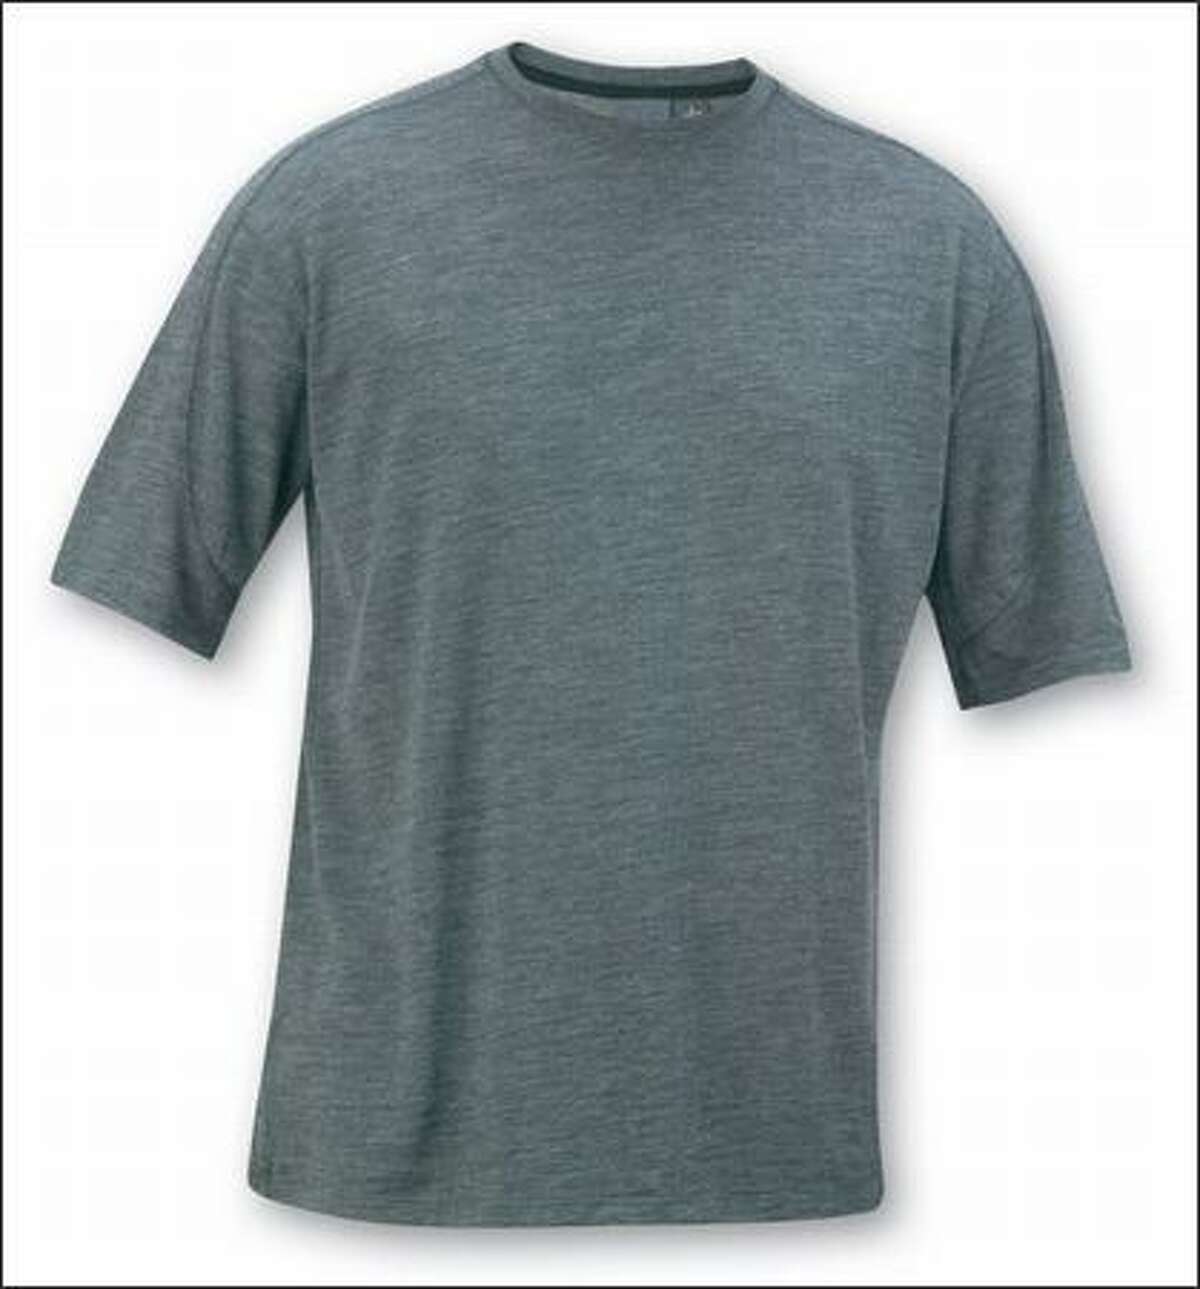 Ibex Qu T-shirt breathes well, insulates, wicks sweat and never stinks.